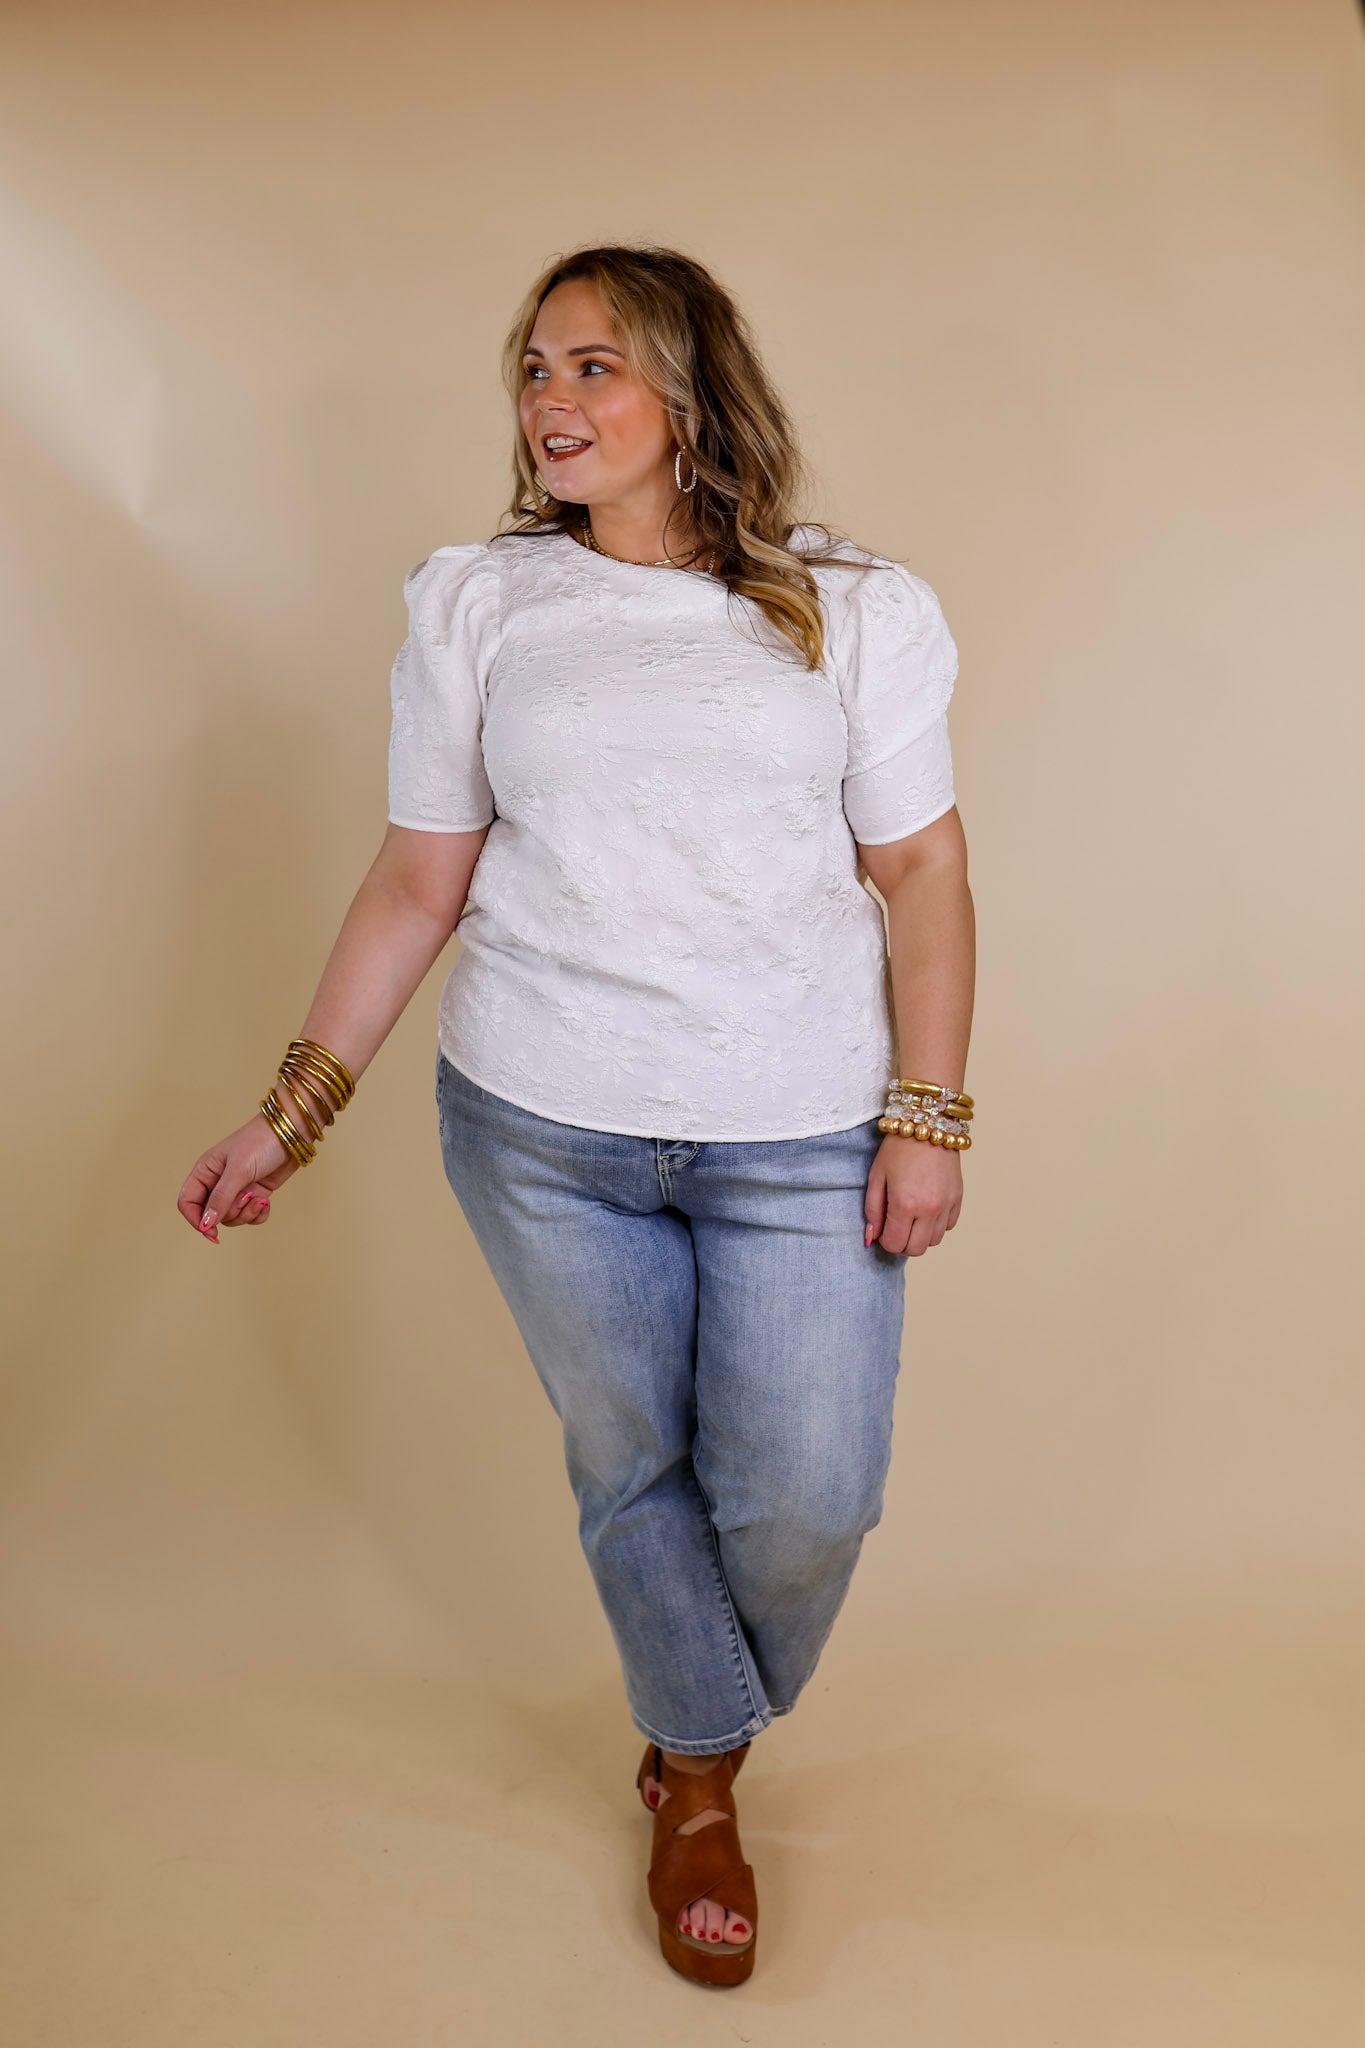 Fab Feeling Puff Shoulder Floral Embossed Top in White - Giddy Up Glamour Boutique